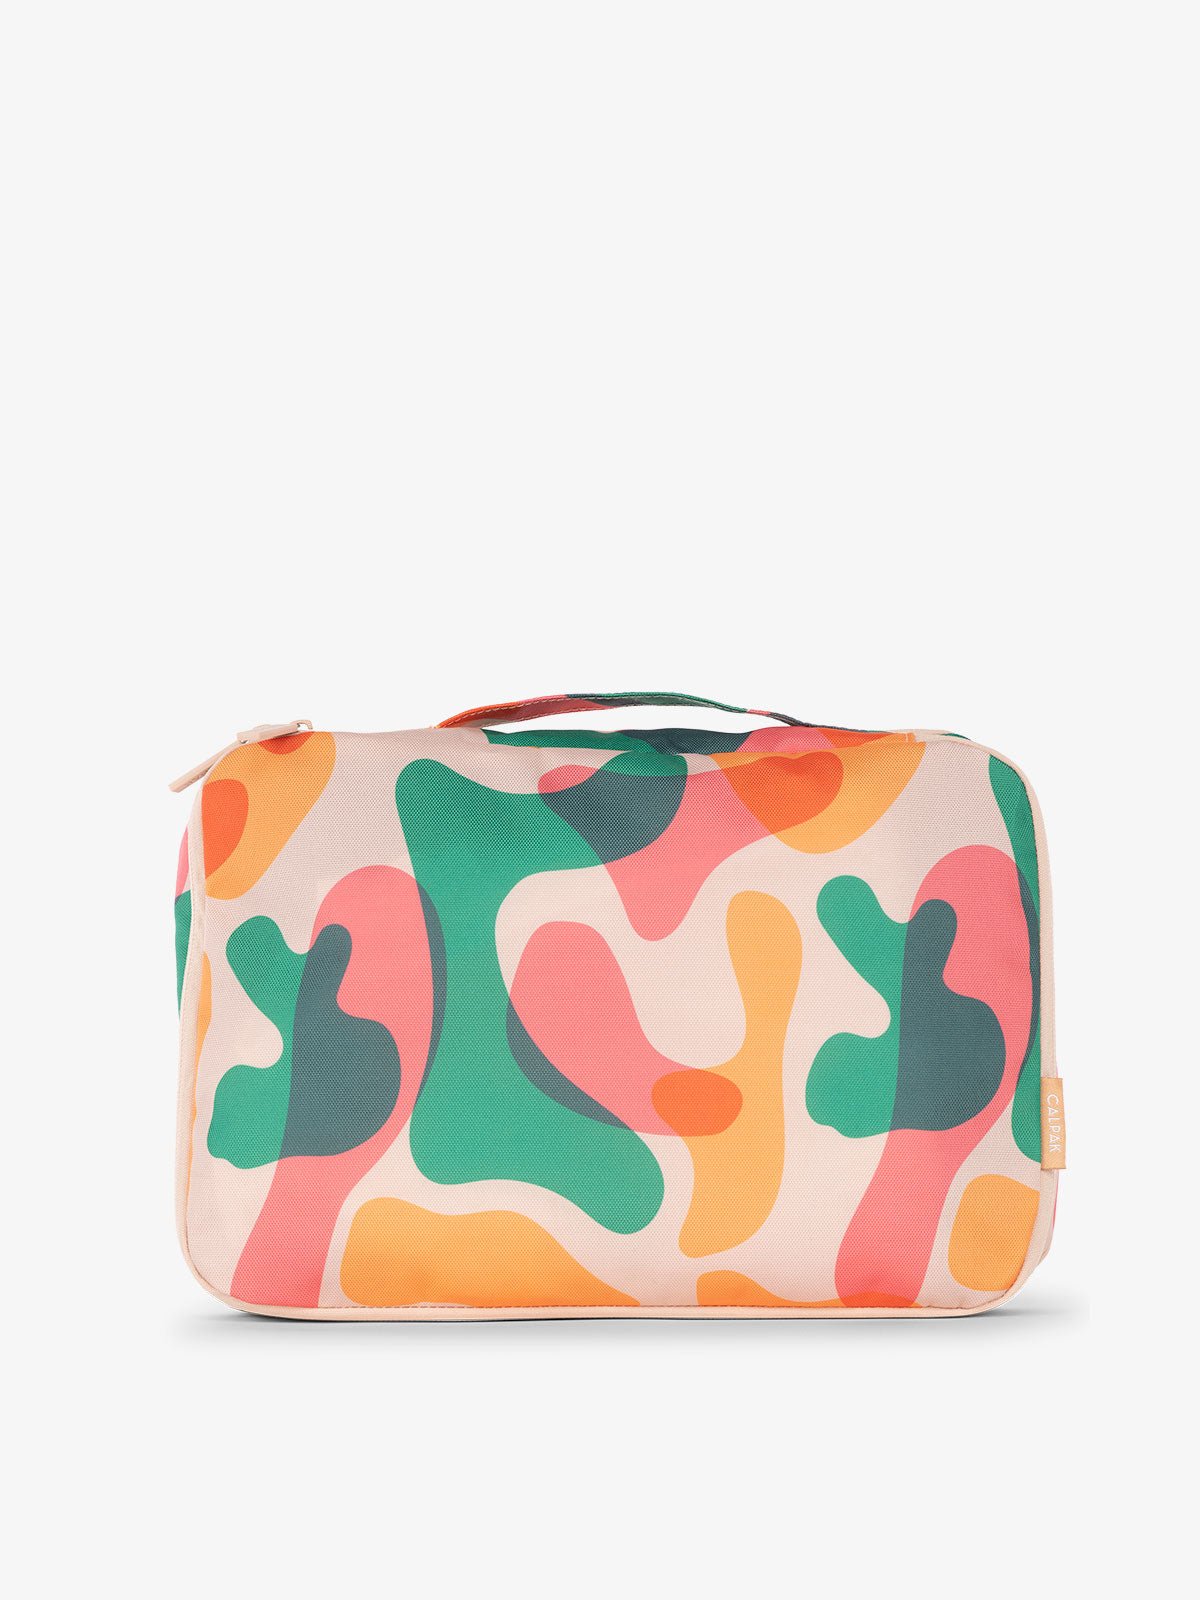 CALPAK packing cubes with top handle in pink and green abstract print